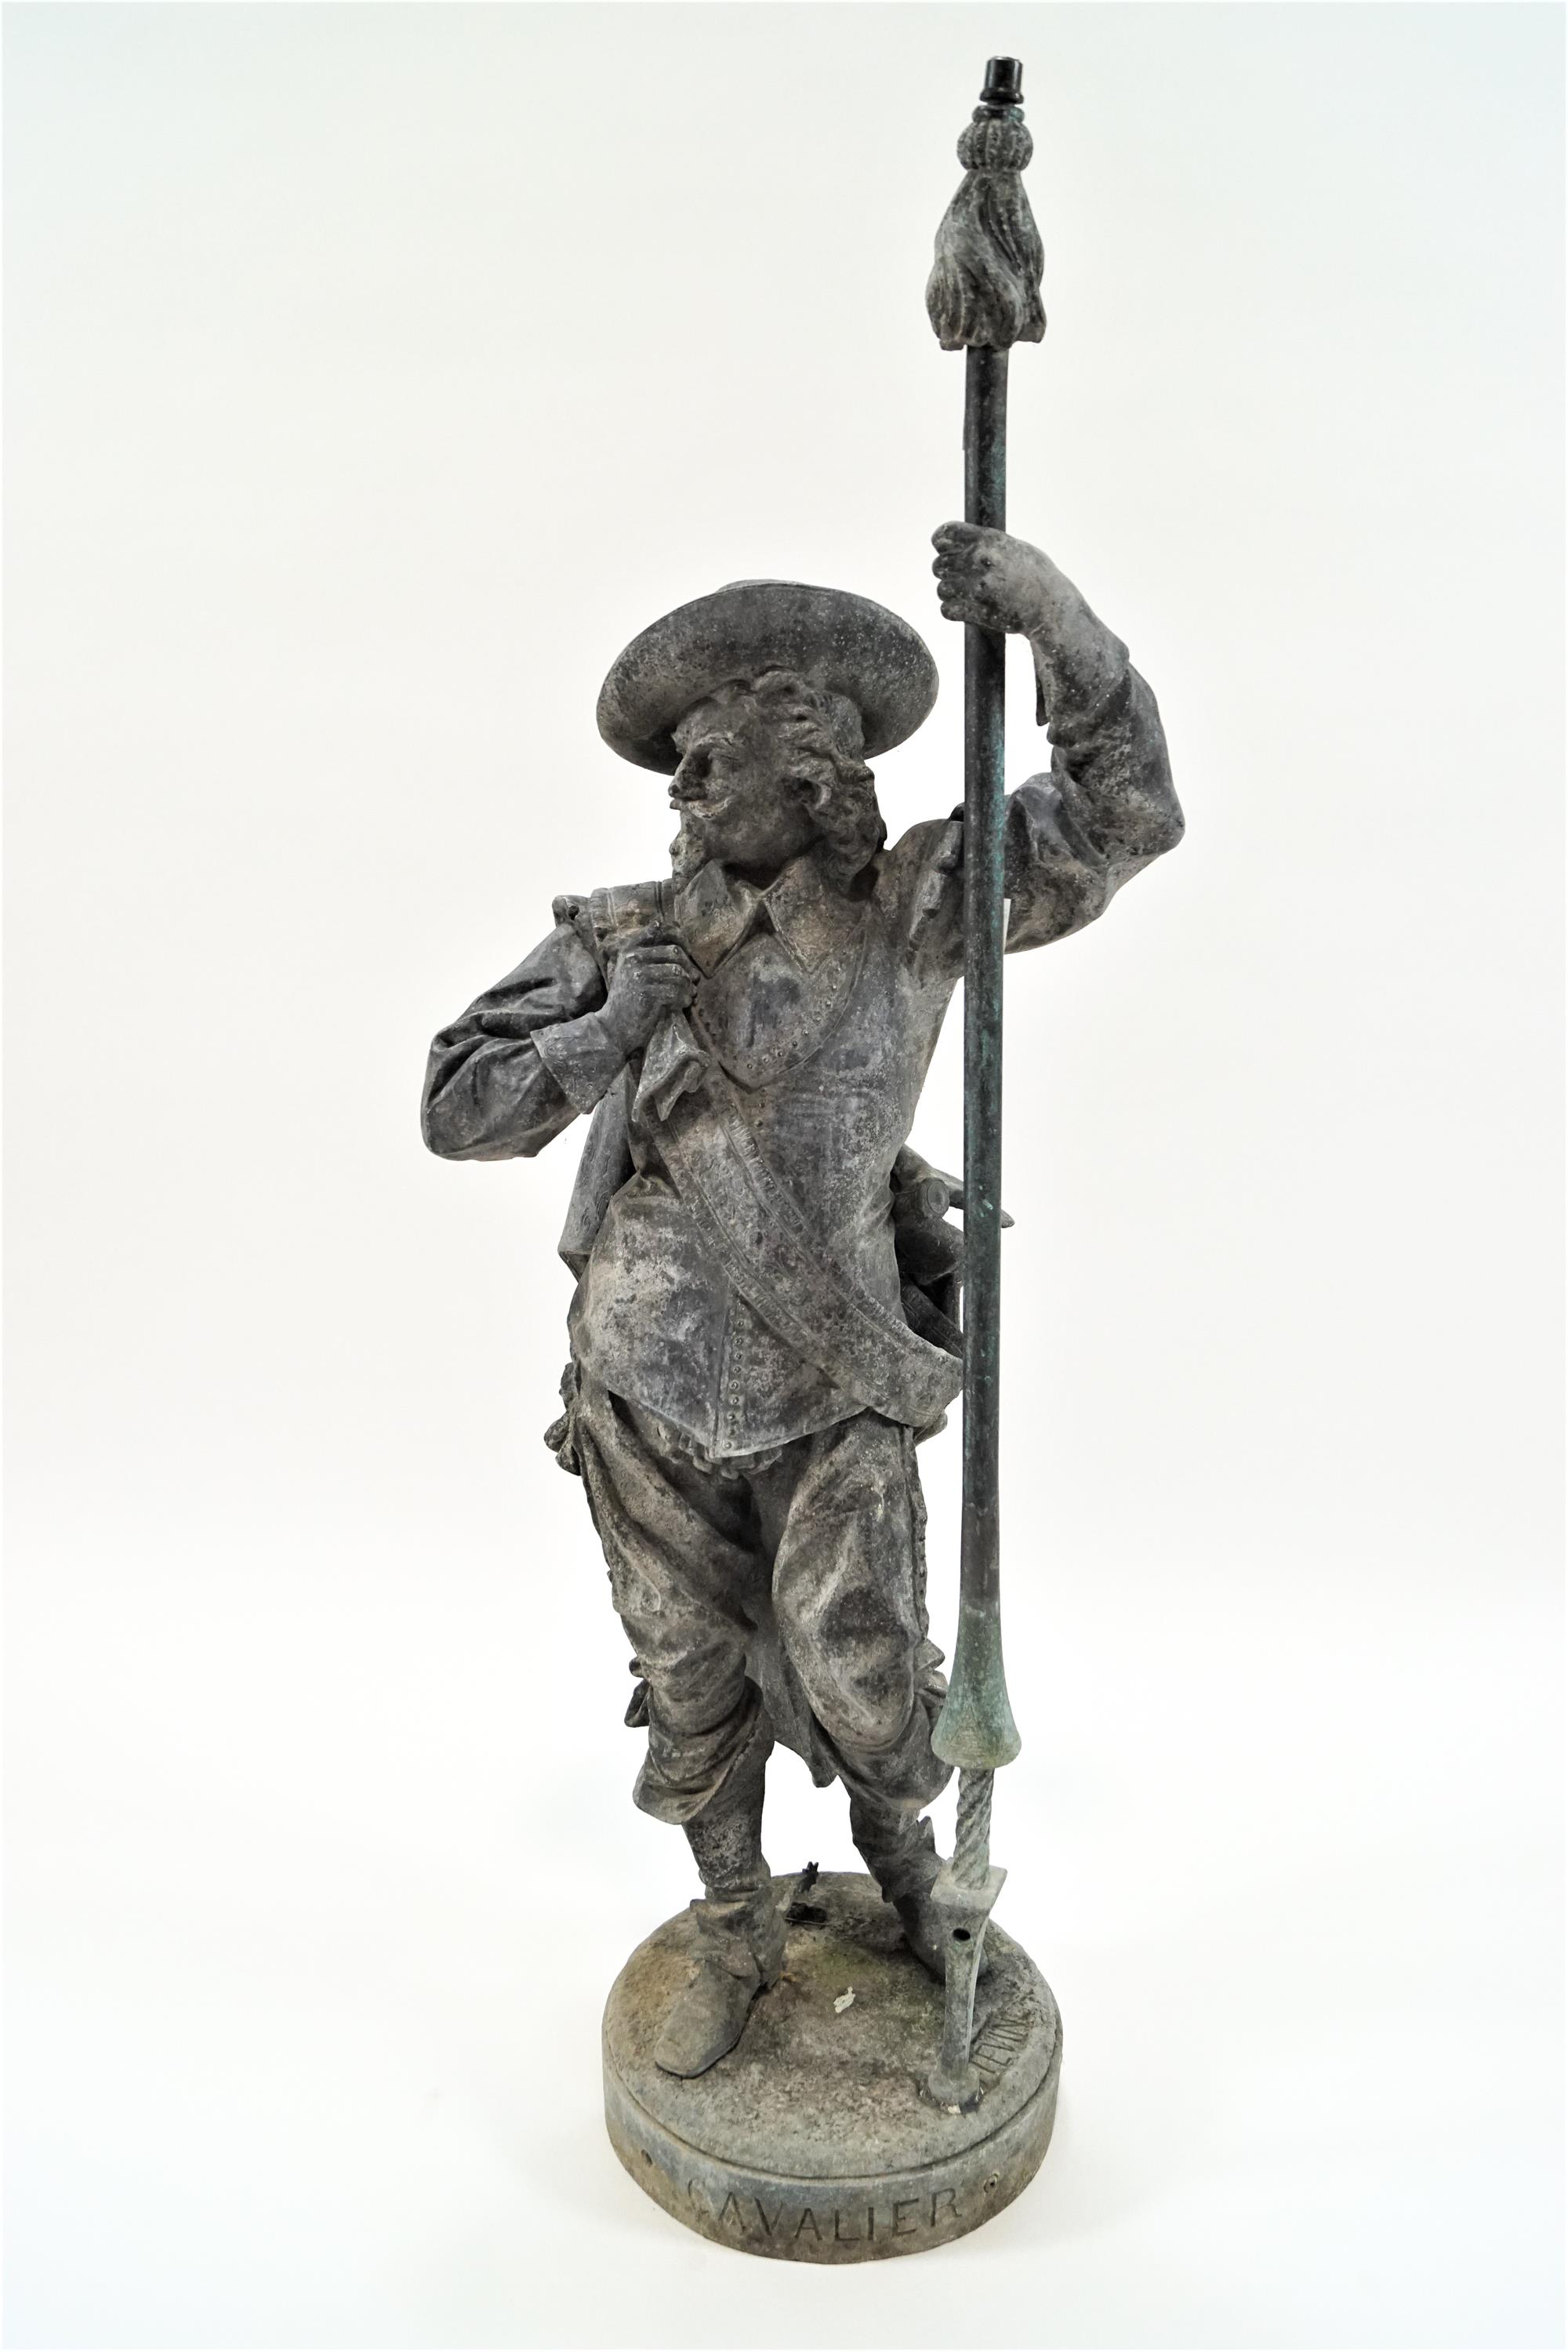 A cast metal statue of a man in Van Dyck style costume with a hat and georgette plate,